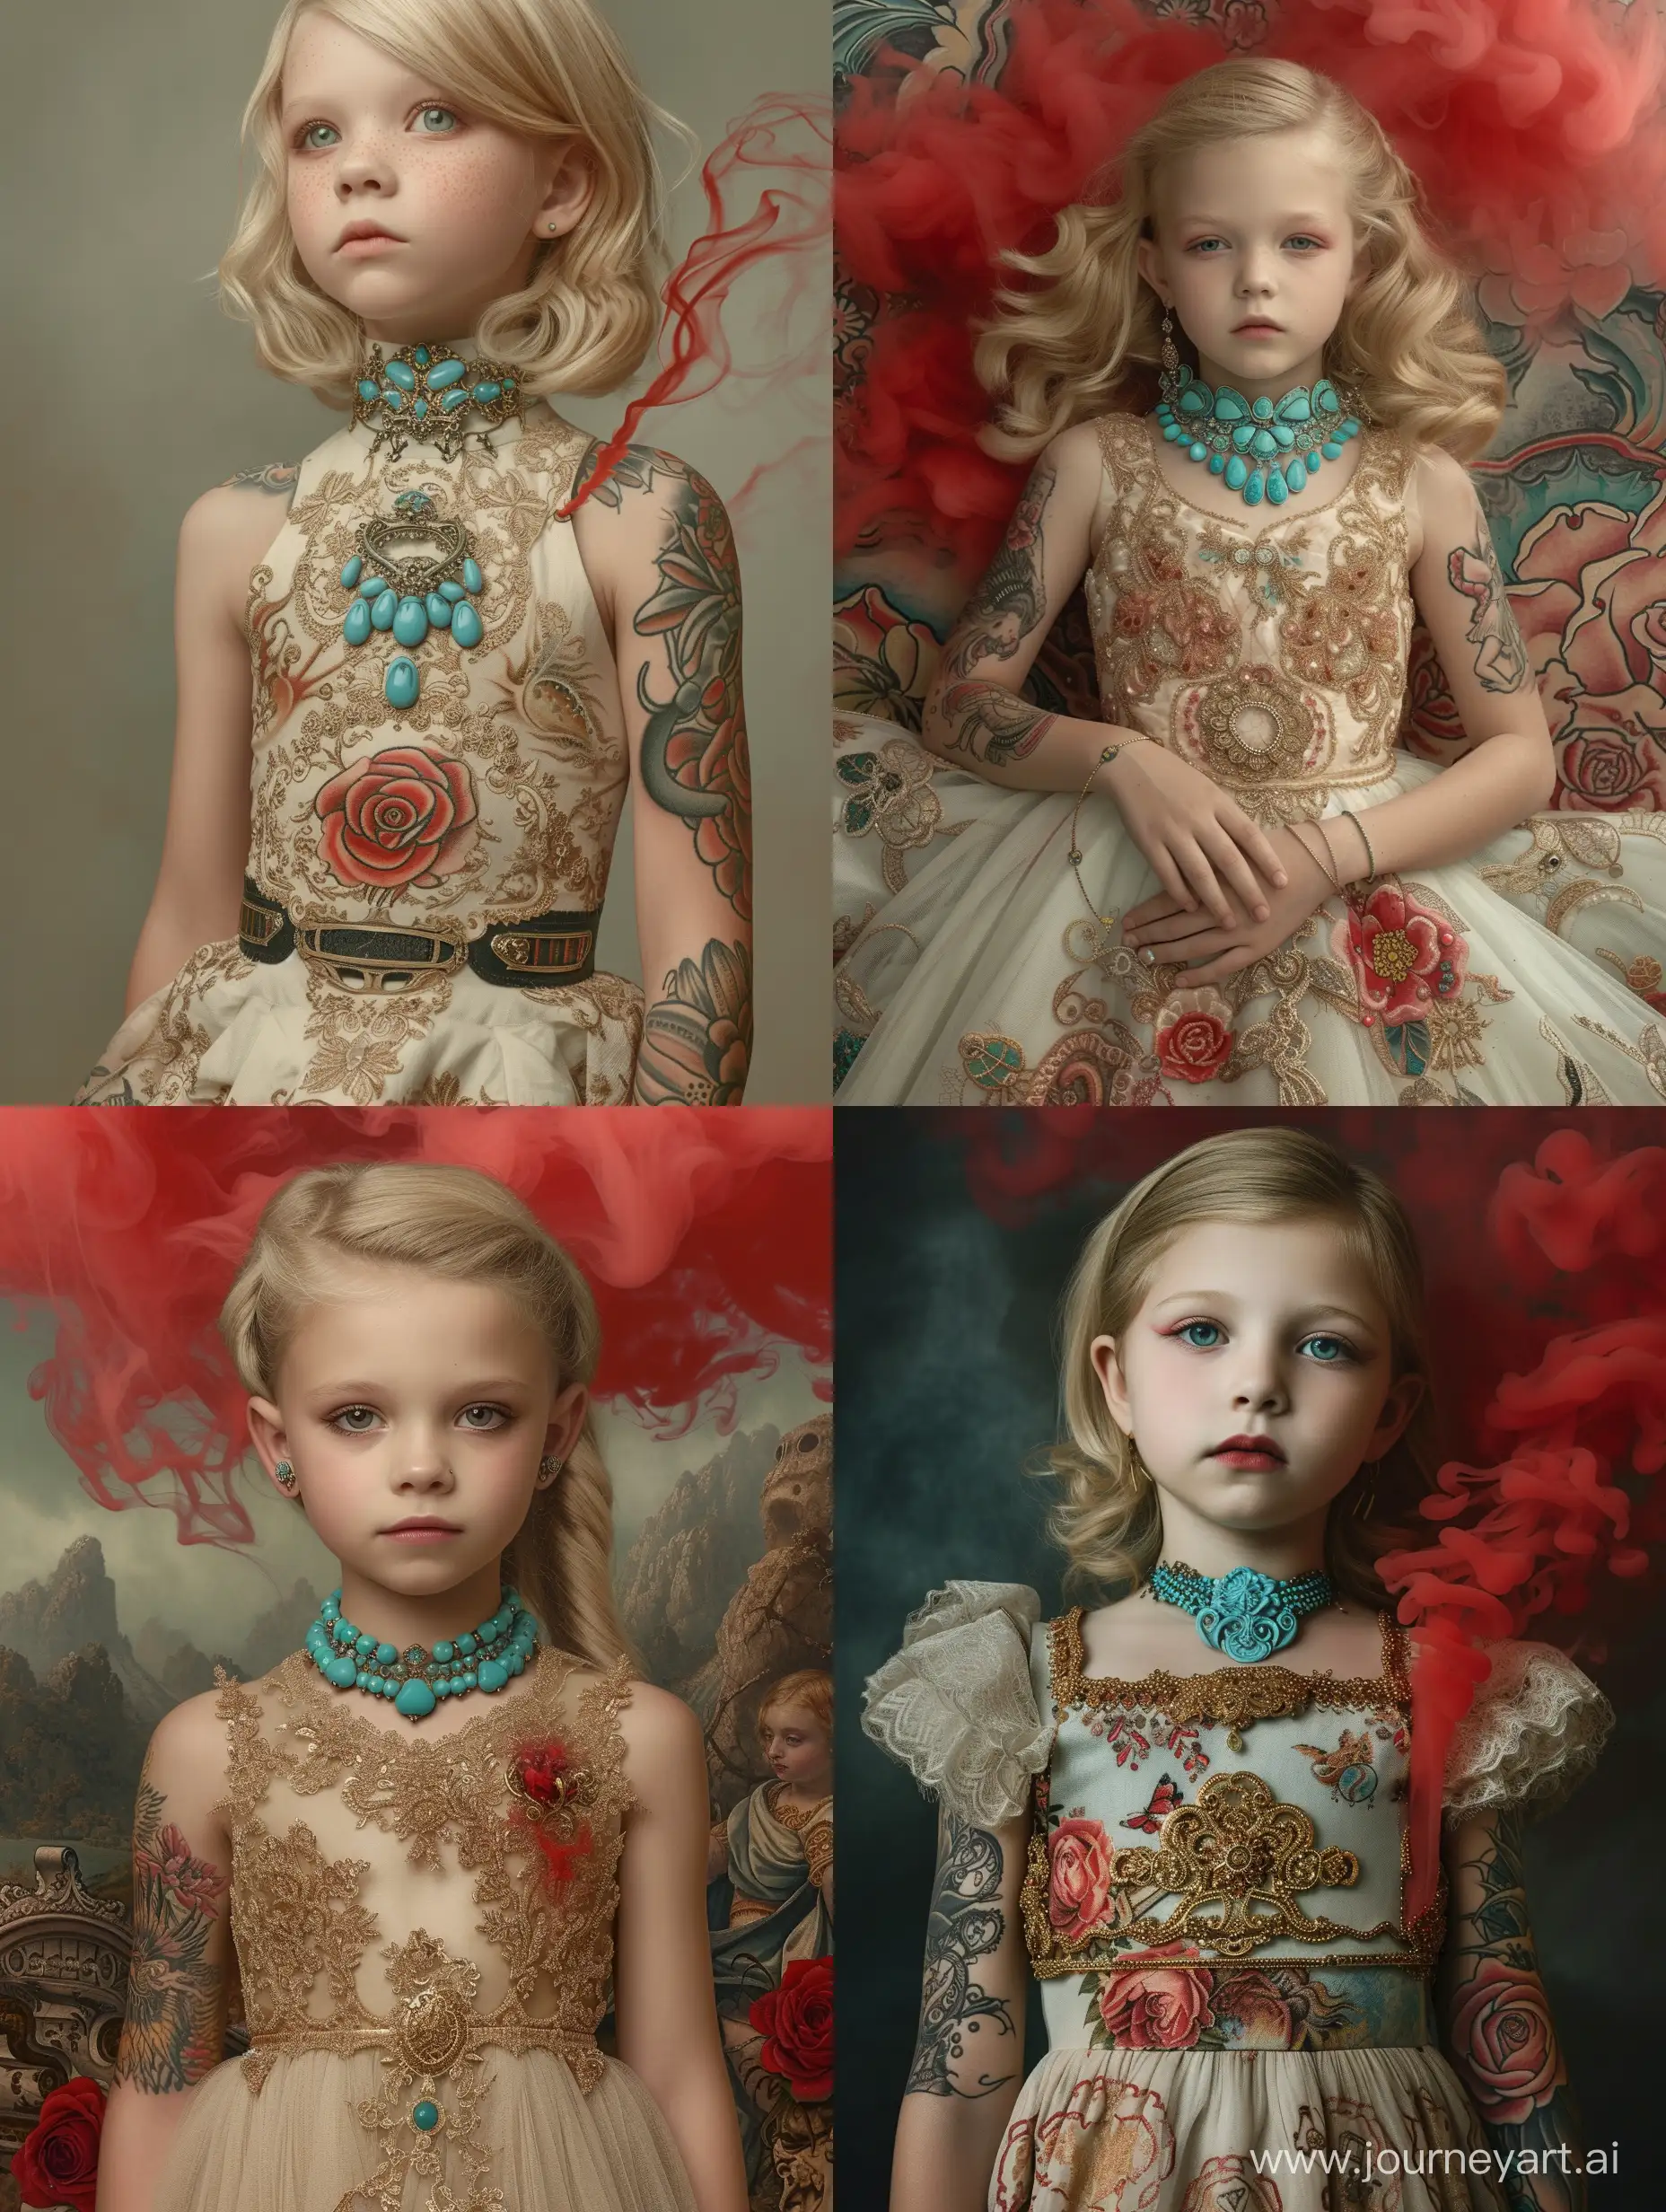 a young hppy blonde girl in a cosmic dress, i can't believe it can be so marvelous and stunning, full-body tattoos, ornate, rococo, grotesque, ornate, art nouveau, symmetrical, turquoise jewelry, red smoke, roses, hypermaximalist, elegant, vintage, hyper realistic, super detailed, pastel colors